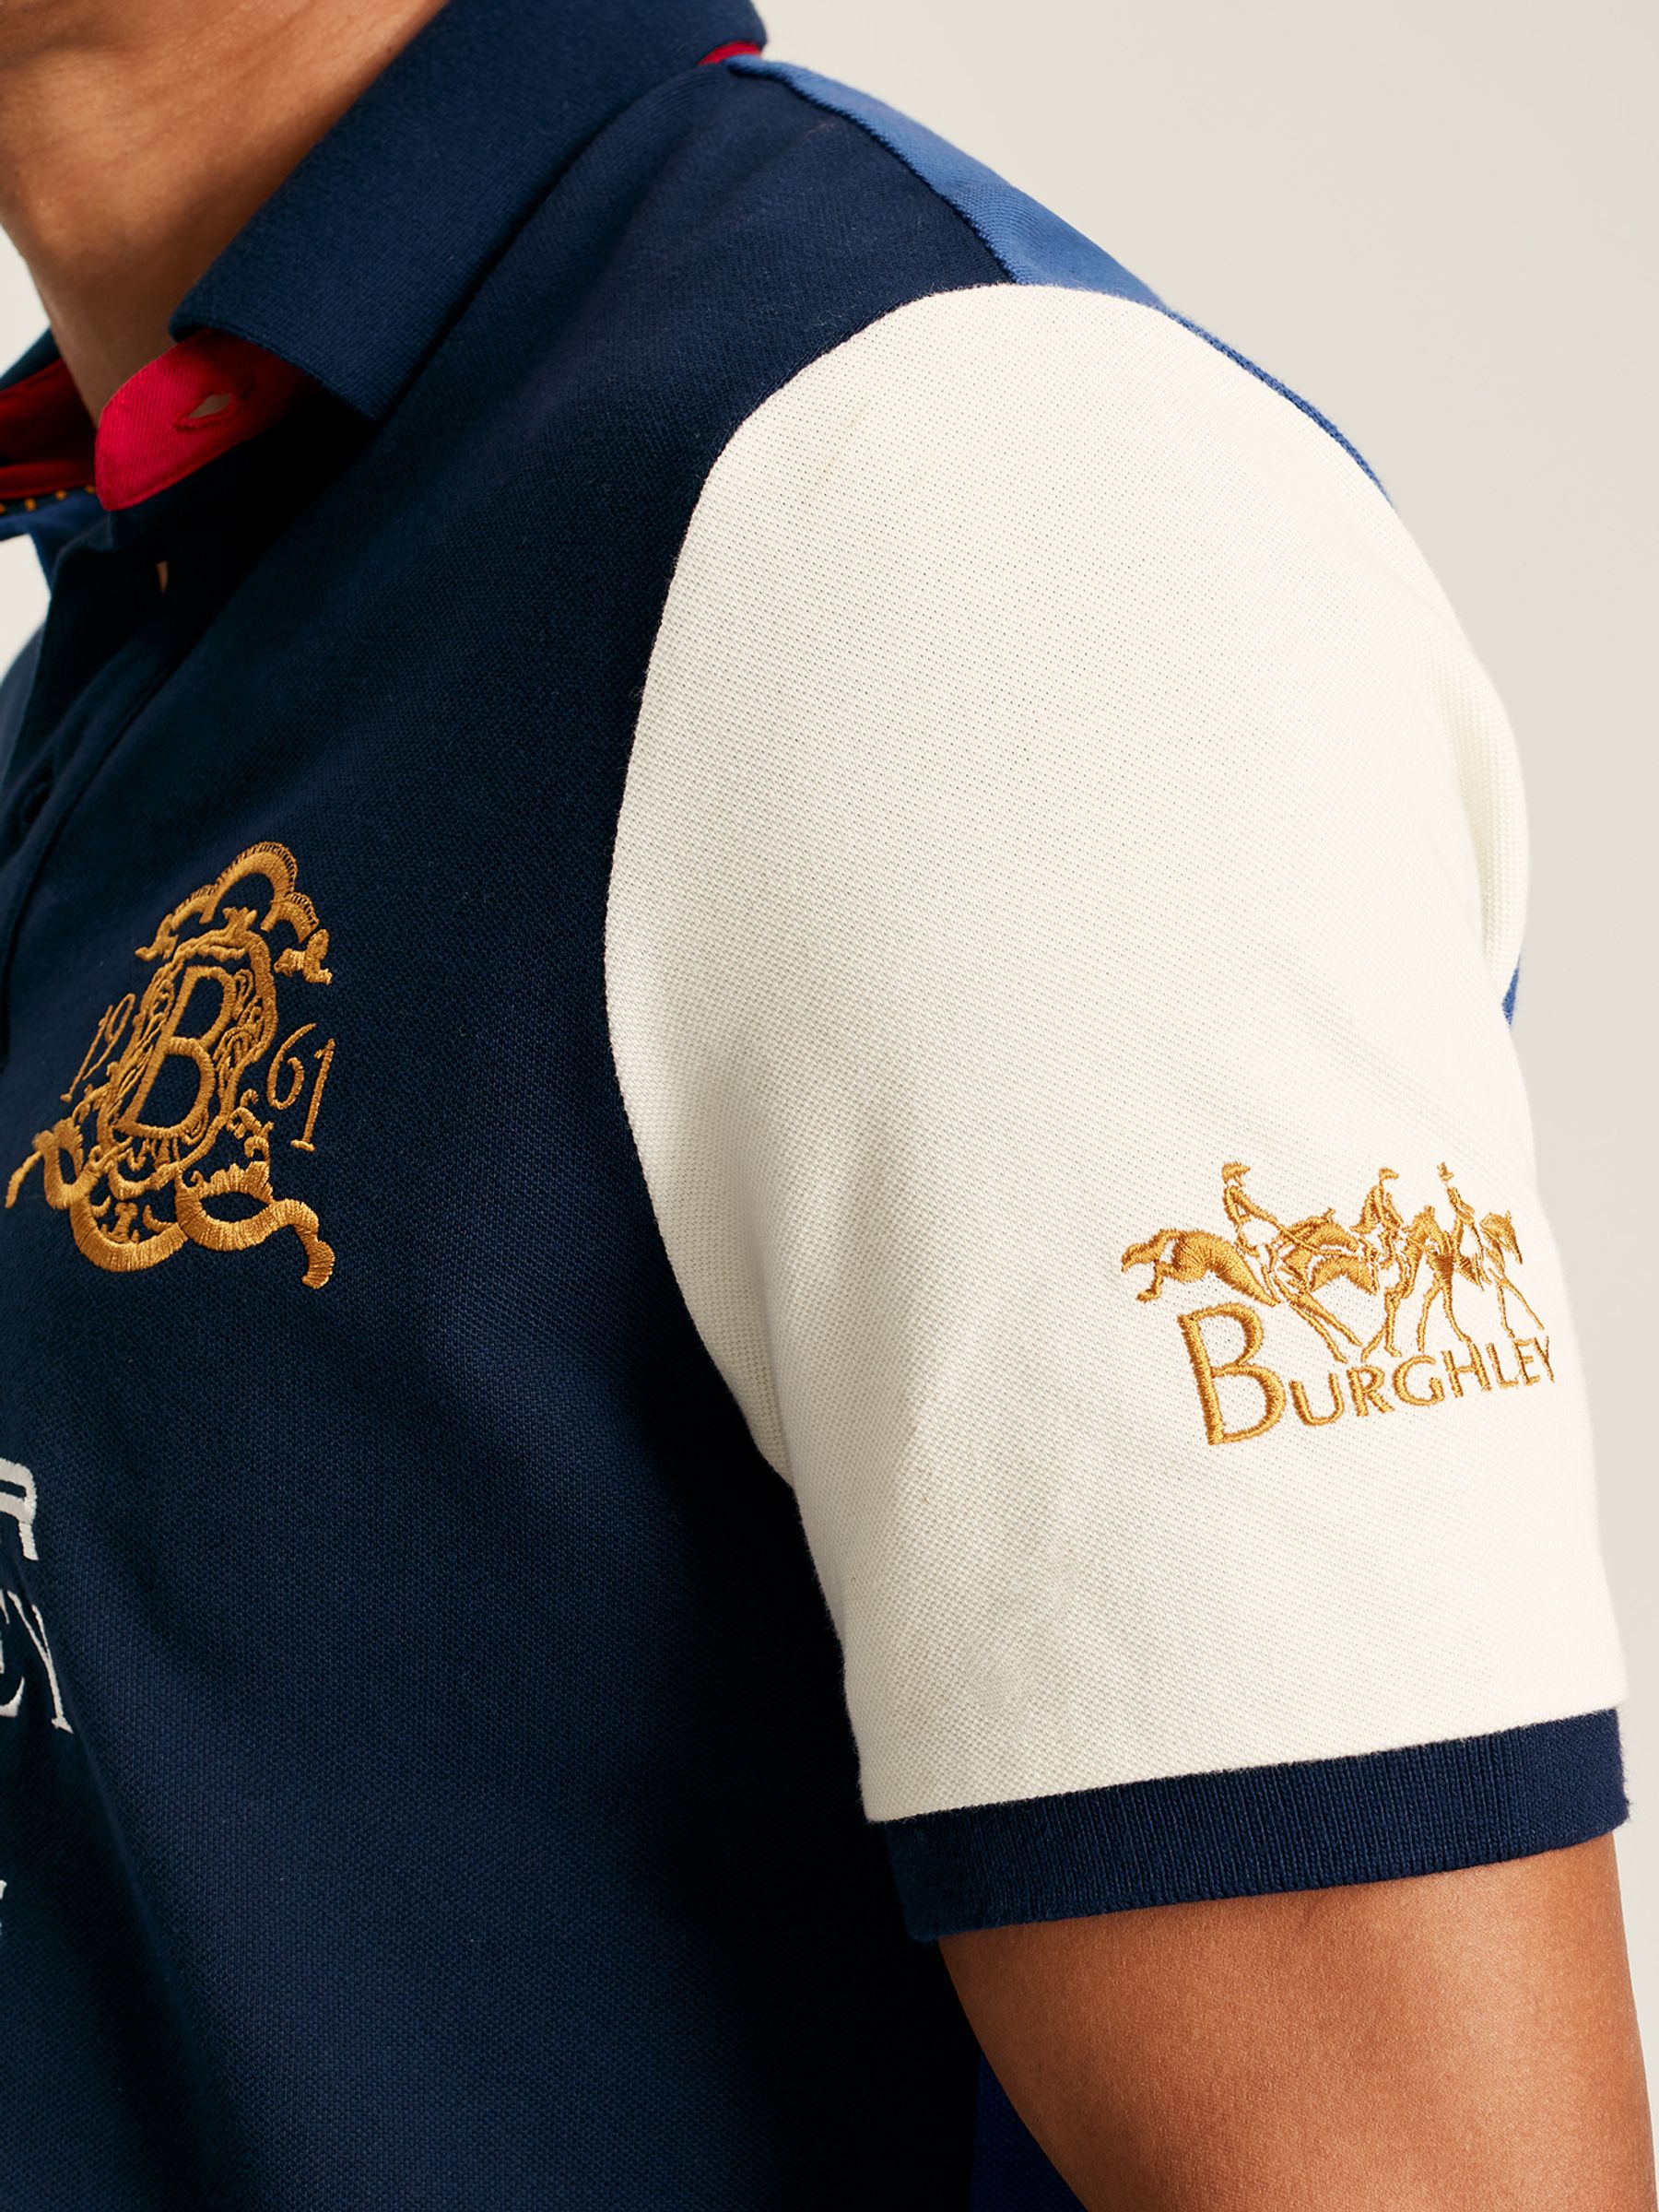 Buy Official Burghley Blue Polo Shirt from the Joules online shop